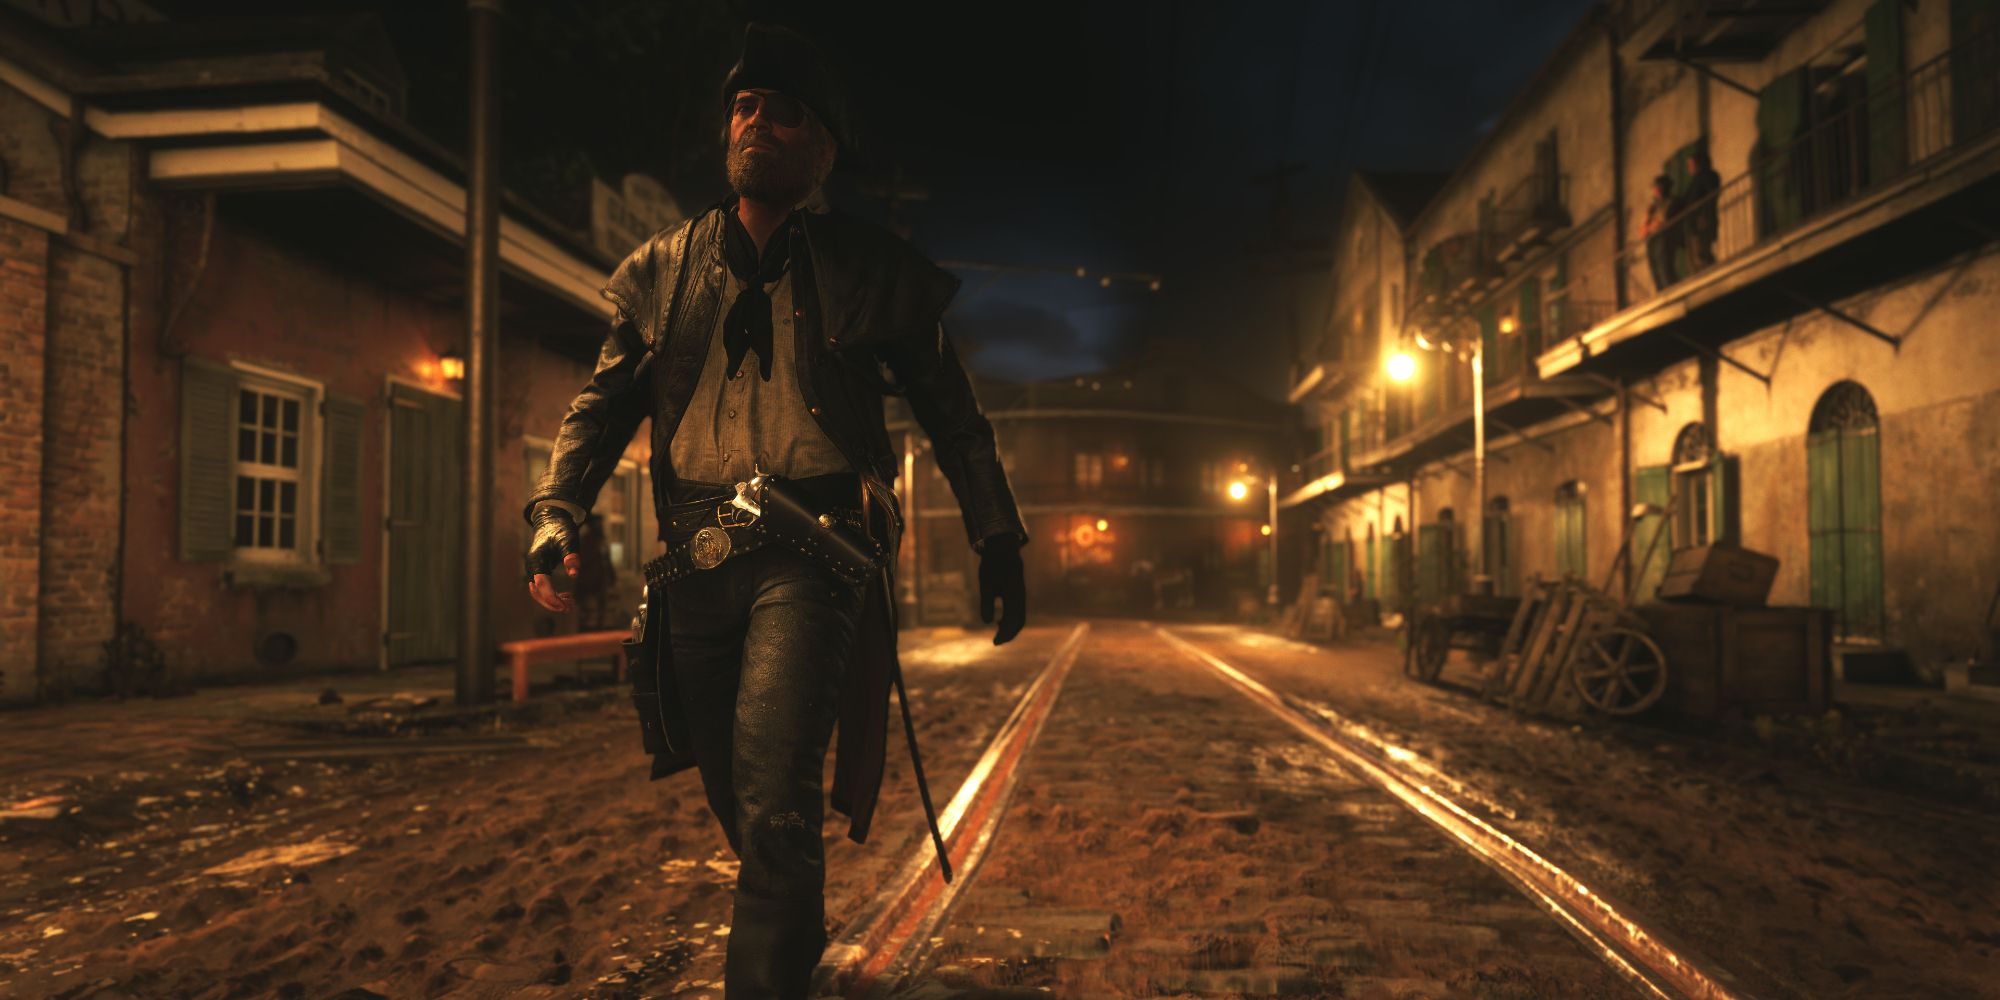 An image of Arthur Morgan from Red Dead Redemption 2 walking around the city at night wearing a new outfit from WhyEm's DLC mod.